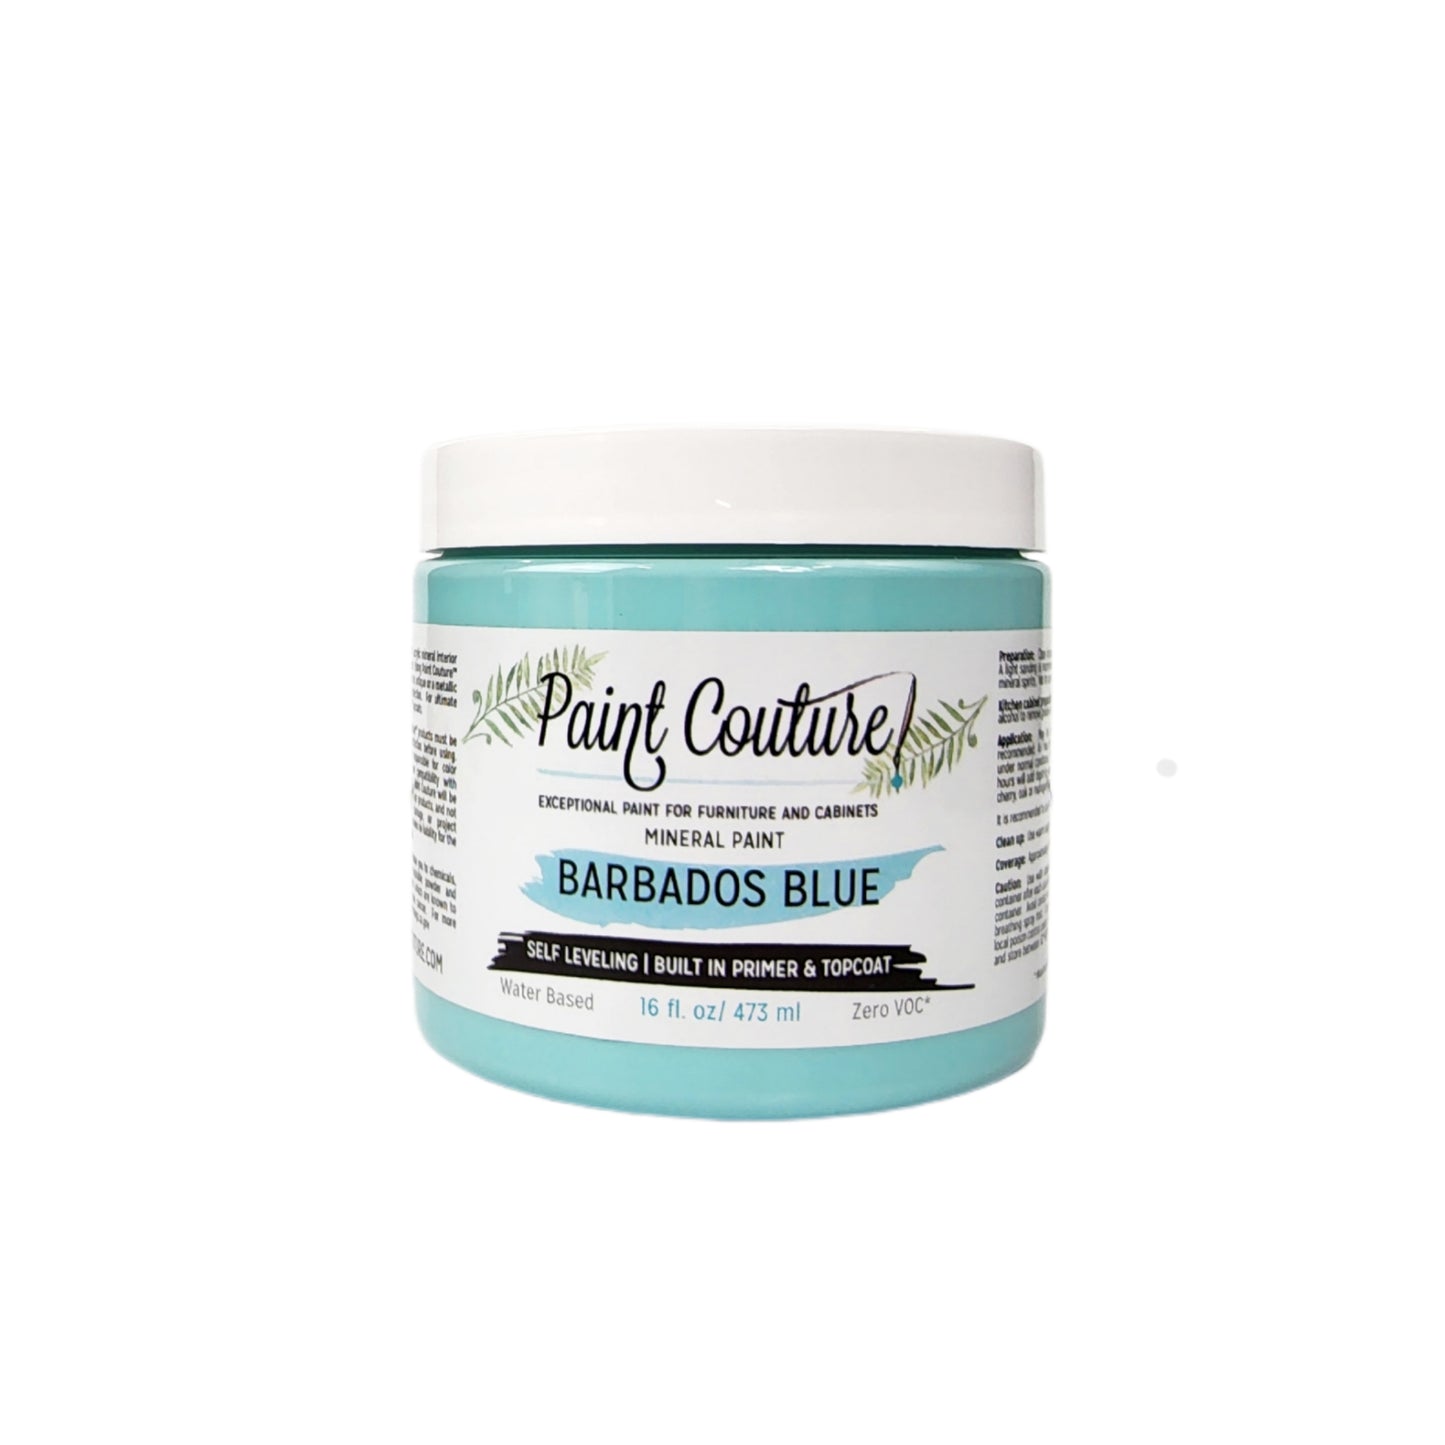 Paint Couture Barbados Blue